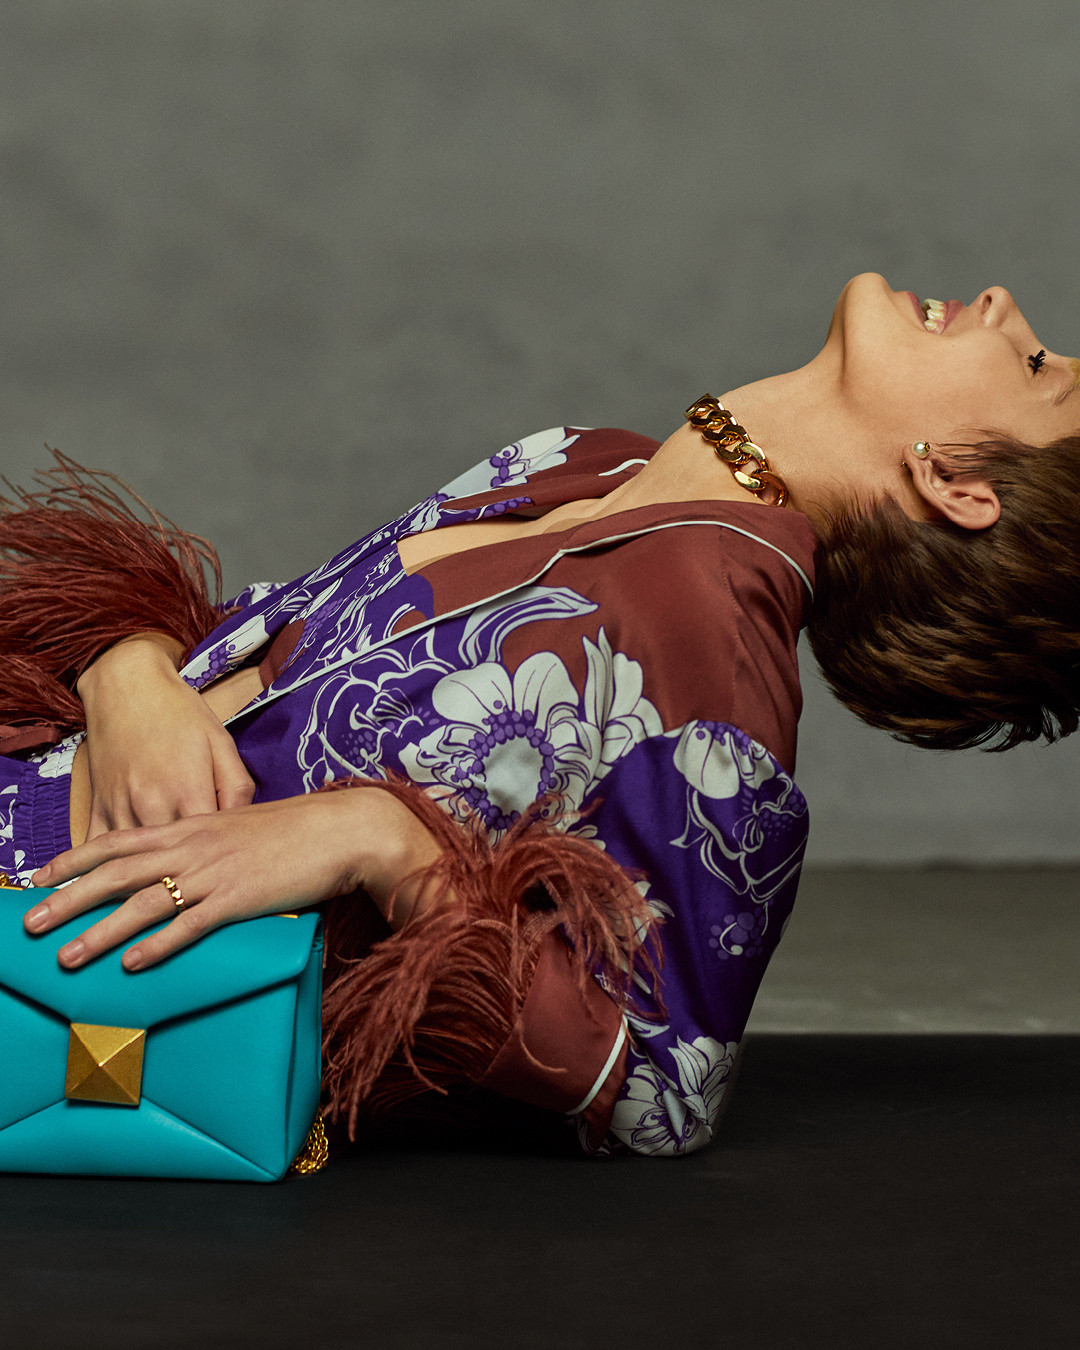 Valentino Presents Its Latest Spring/Summer Campaign 'Rendez-Vous'  featuring Zendaya